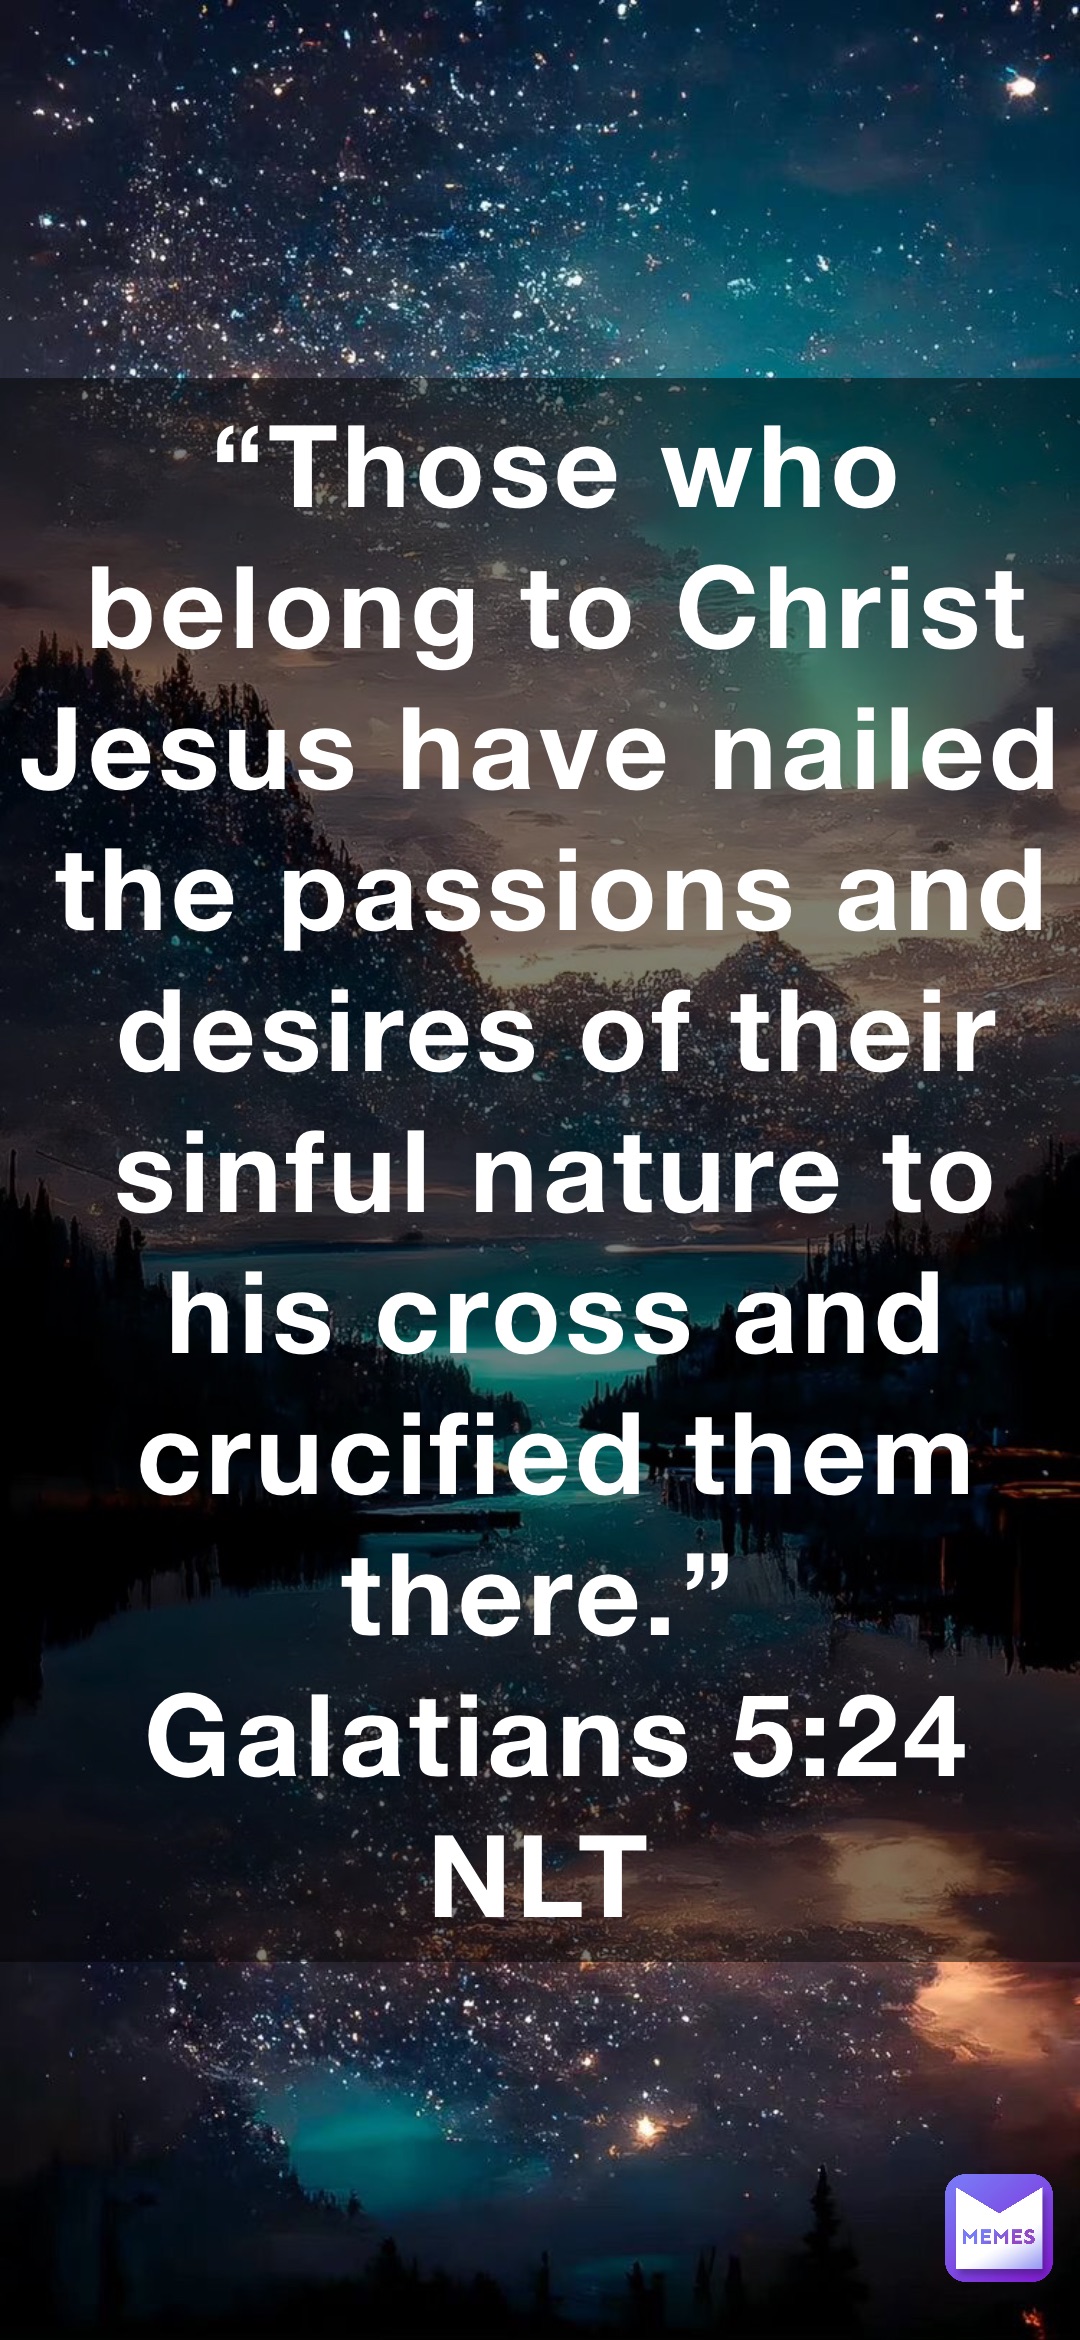 “Those who belong to Christ Jesus have nailed the passions and desires of their sinful nature to his cross and crucified them there.”
‭‭Galatians‬ ‭5‬:‭24‬ ‭NLT‬‬